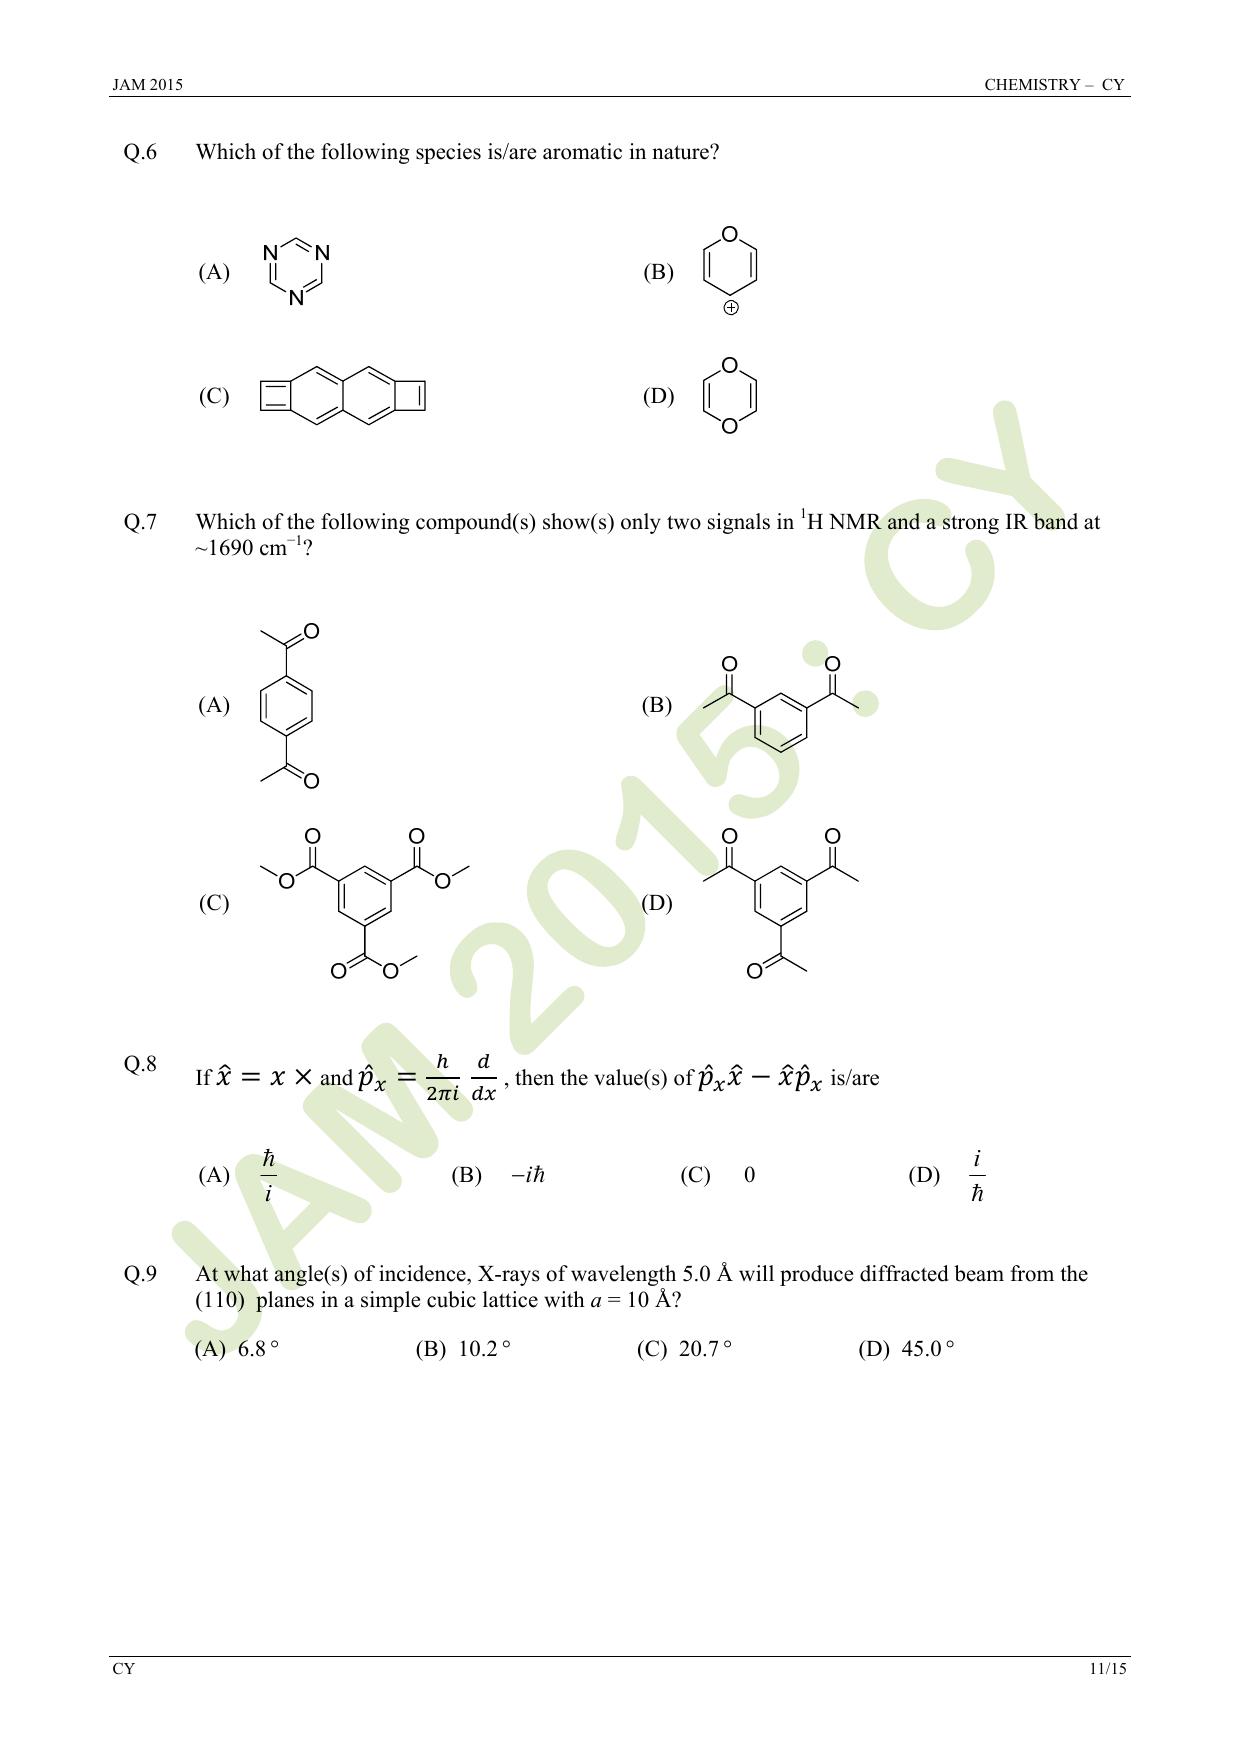 JAM 2015: CY Question Paper - Page 11